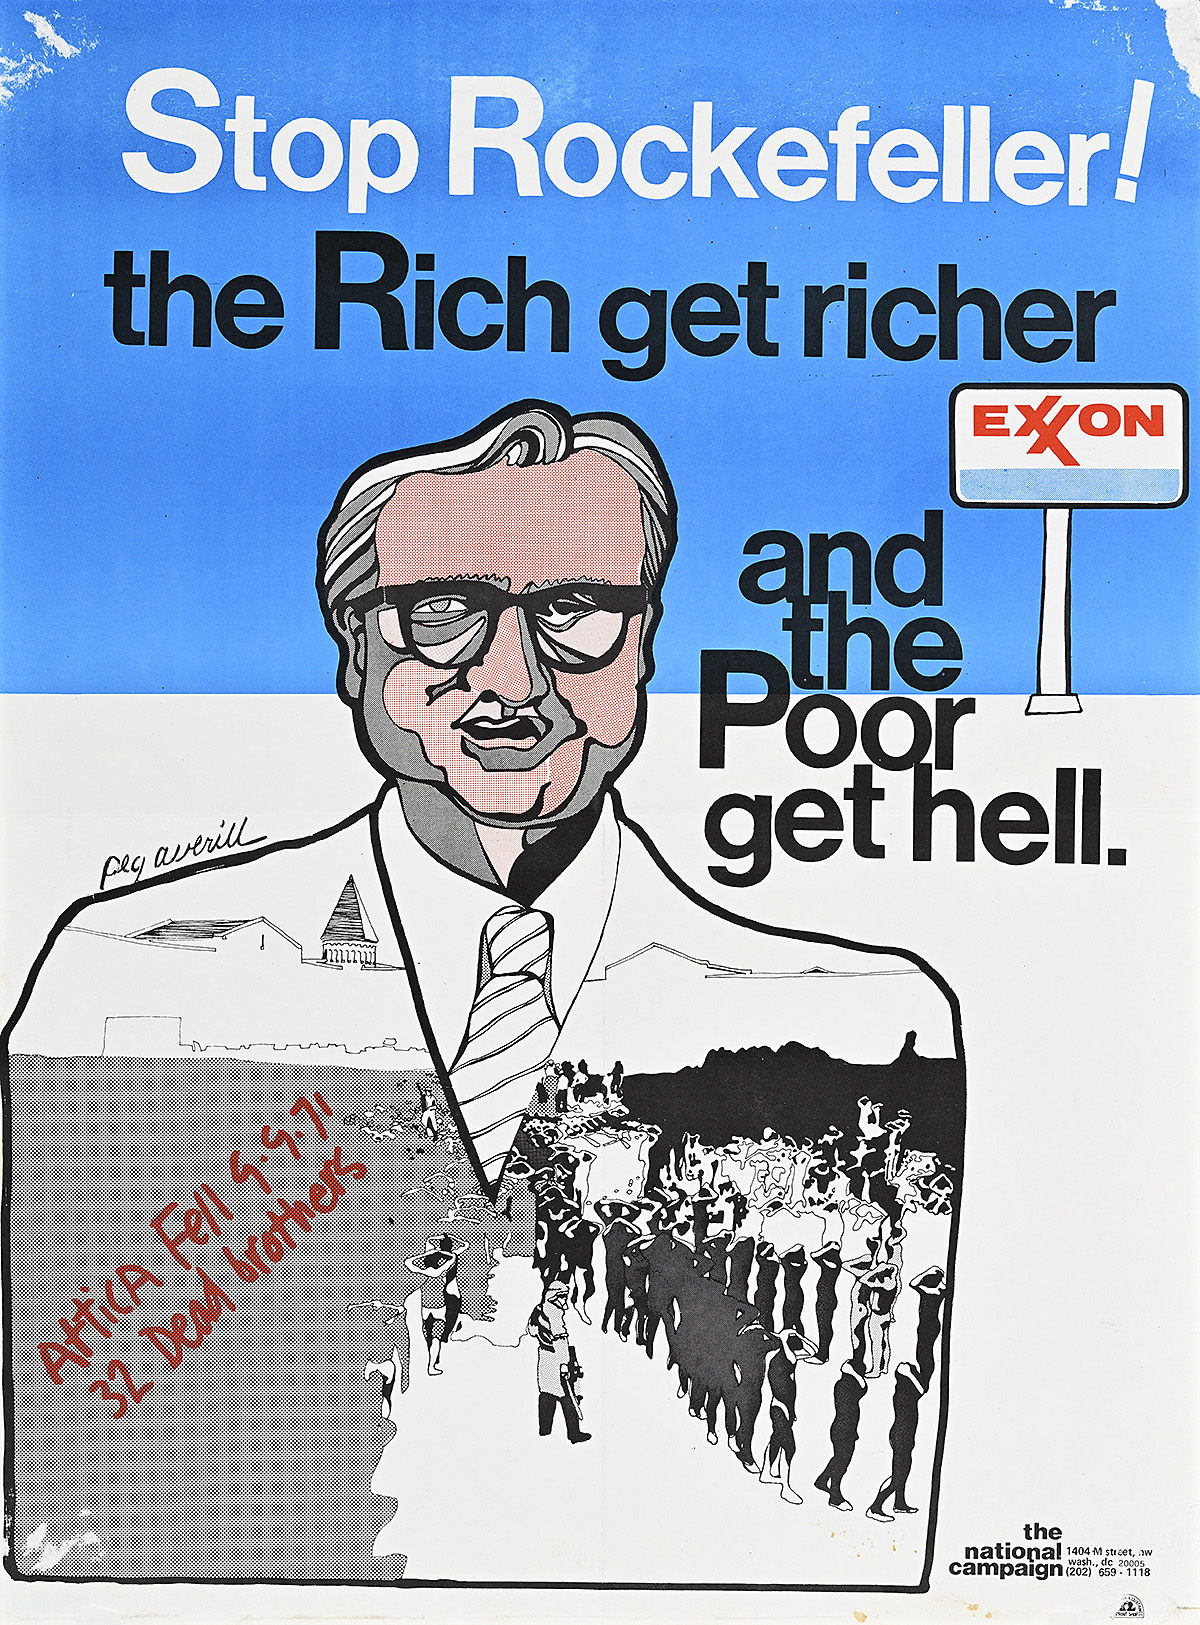 A poster of a white man in front of an Exxon sign wearing a white suit with an uprising scene on it.